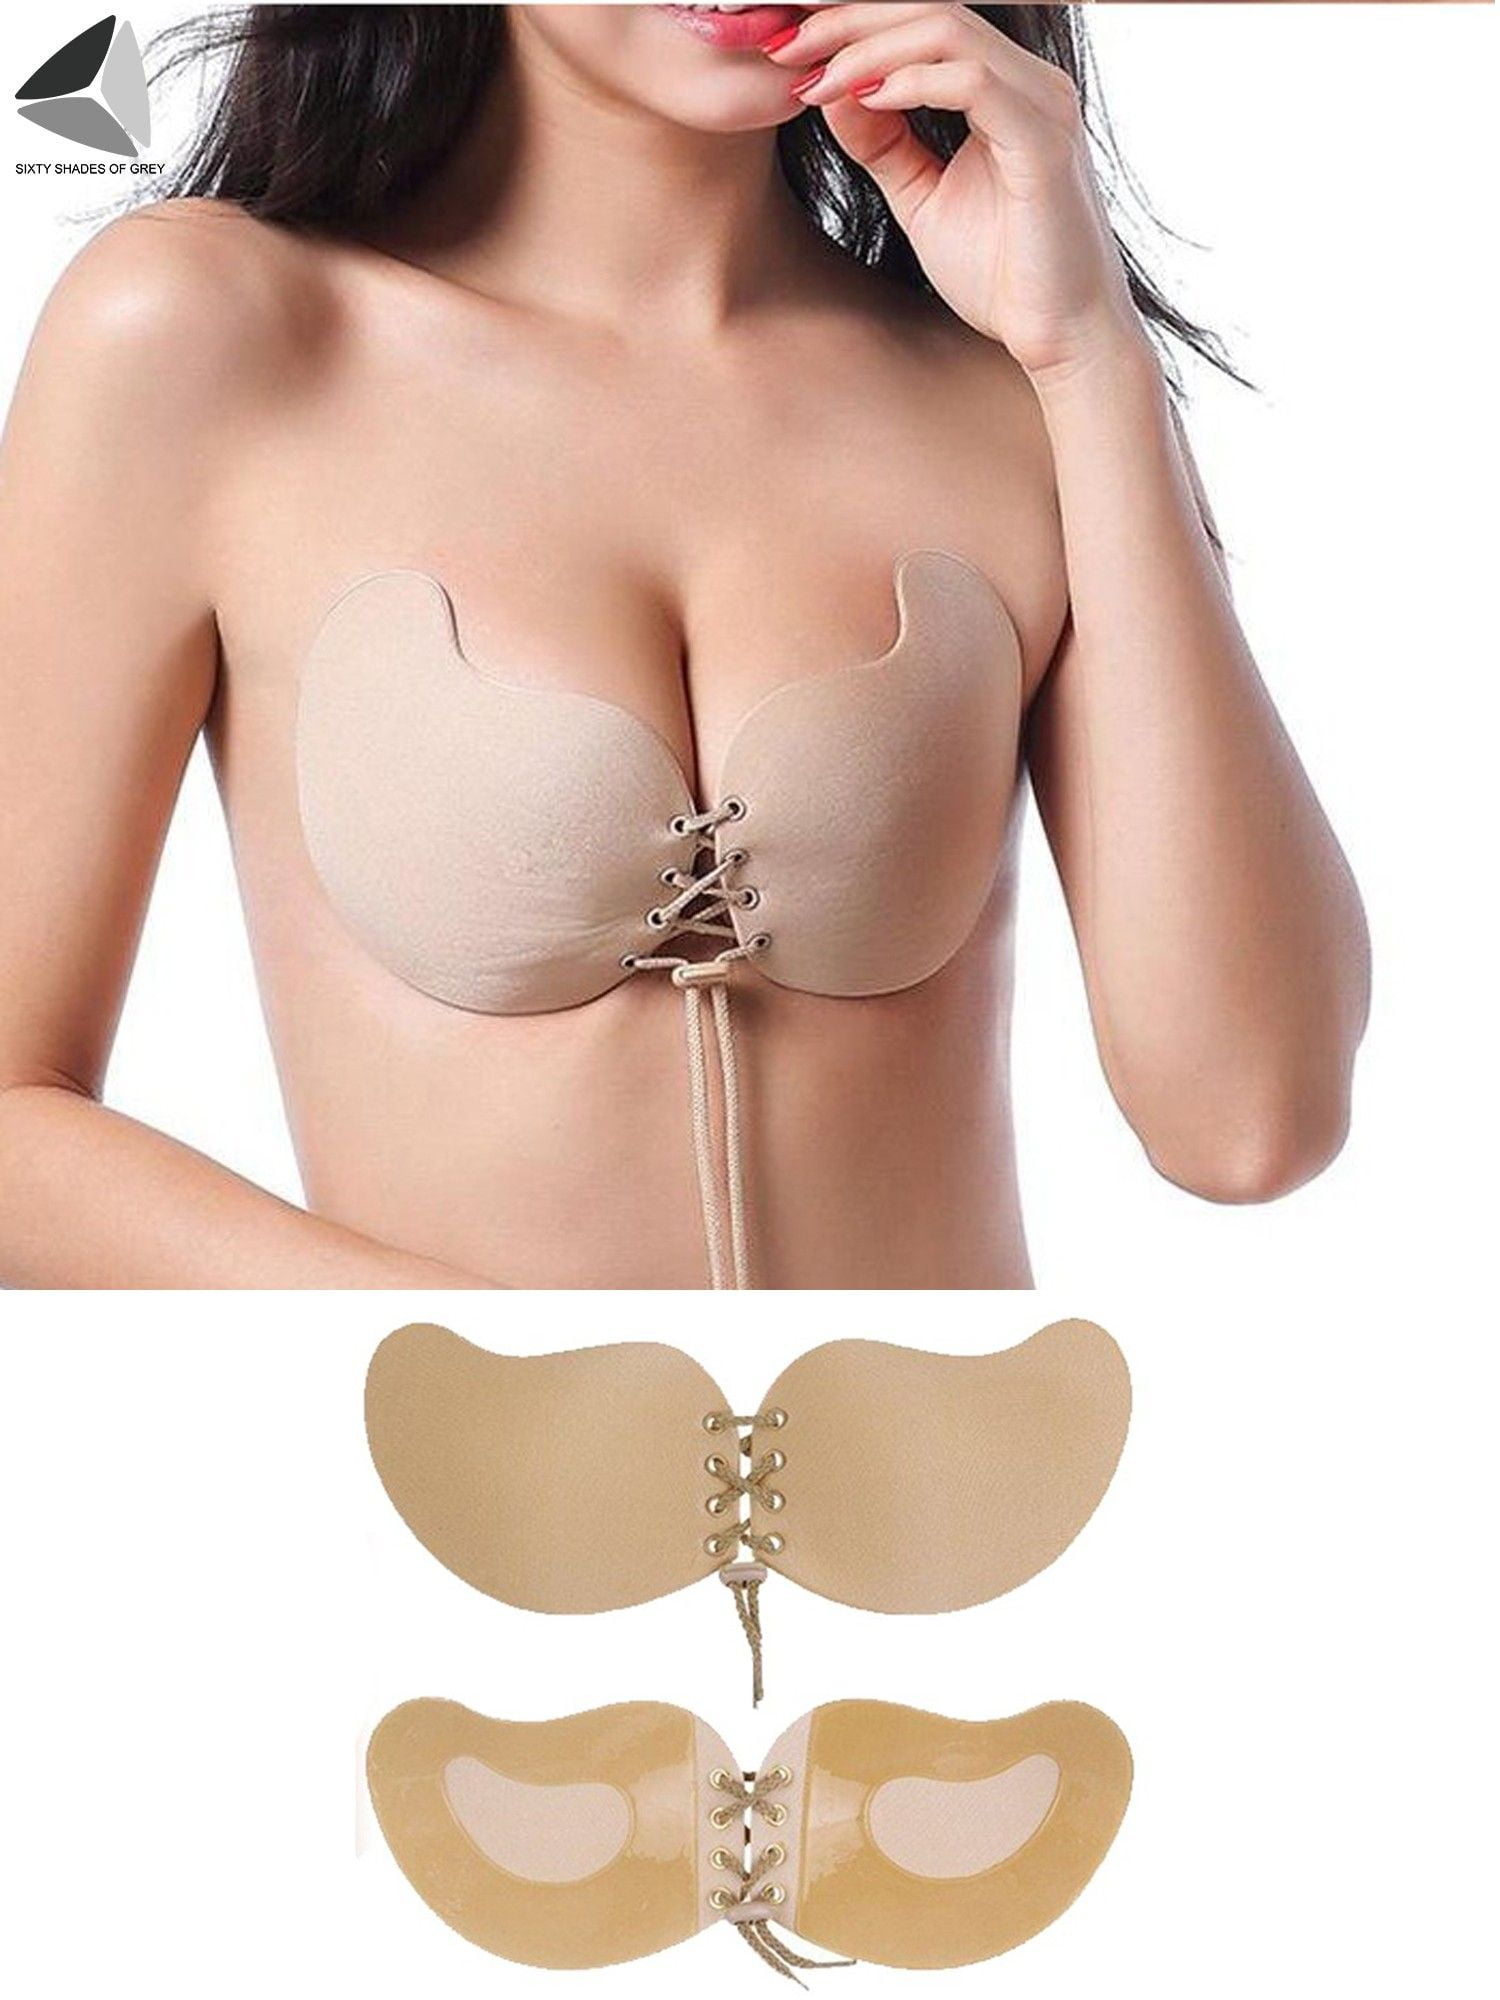 PULLIMORE Women's Push Up Invisible Bras Breathable Self-Adhesive Backless  Bras Drawstring Chest Stickers (Cup D, Skin) 